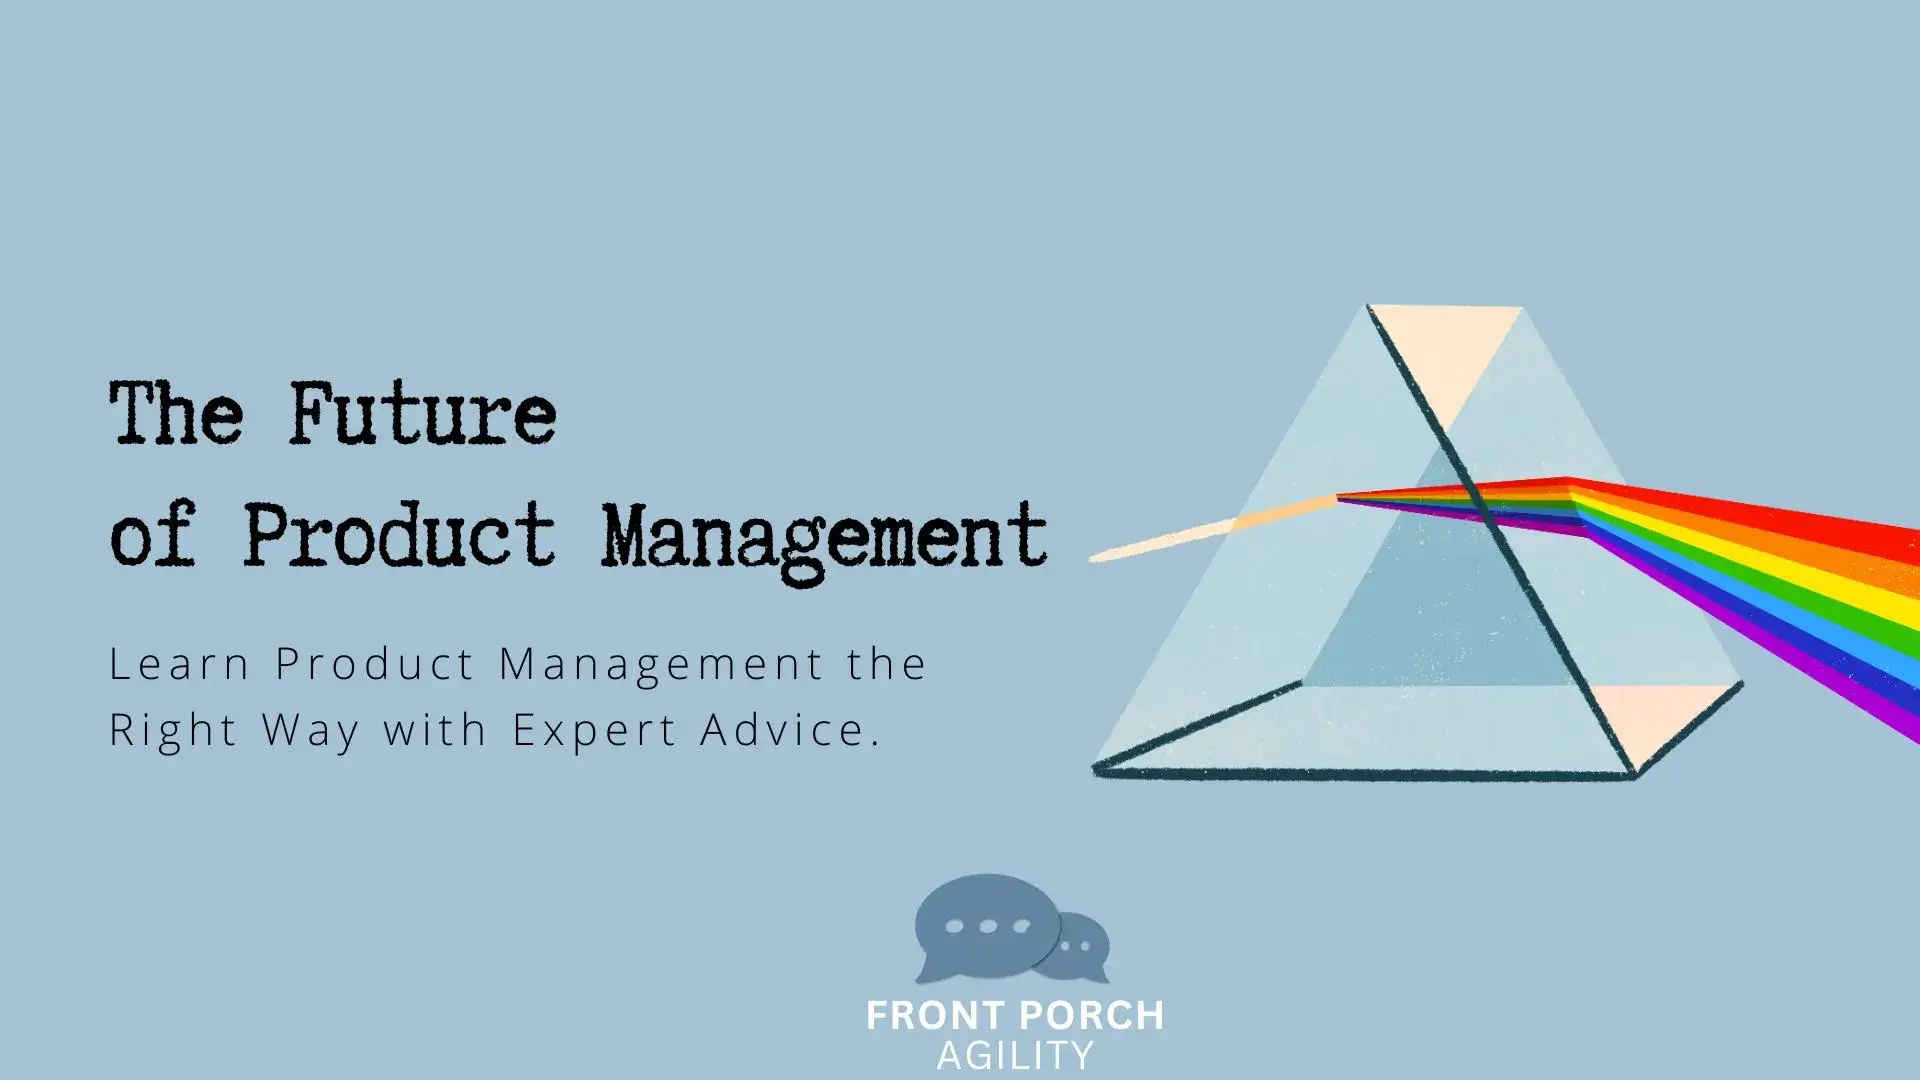 The future of Product Management